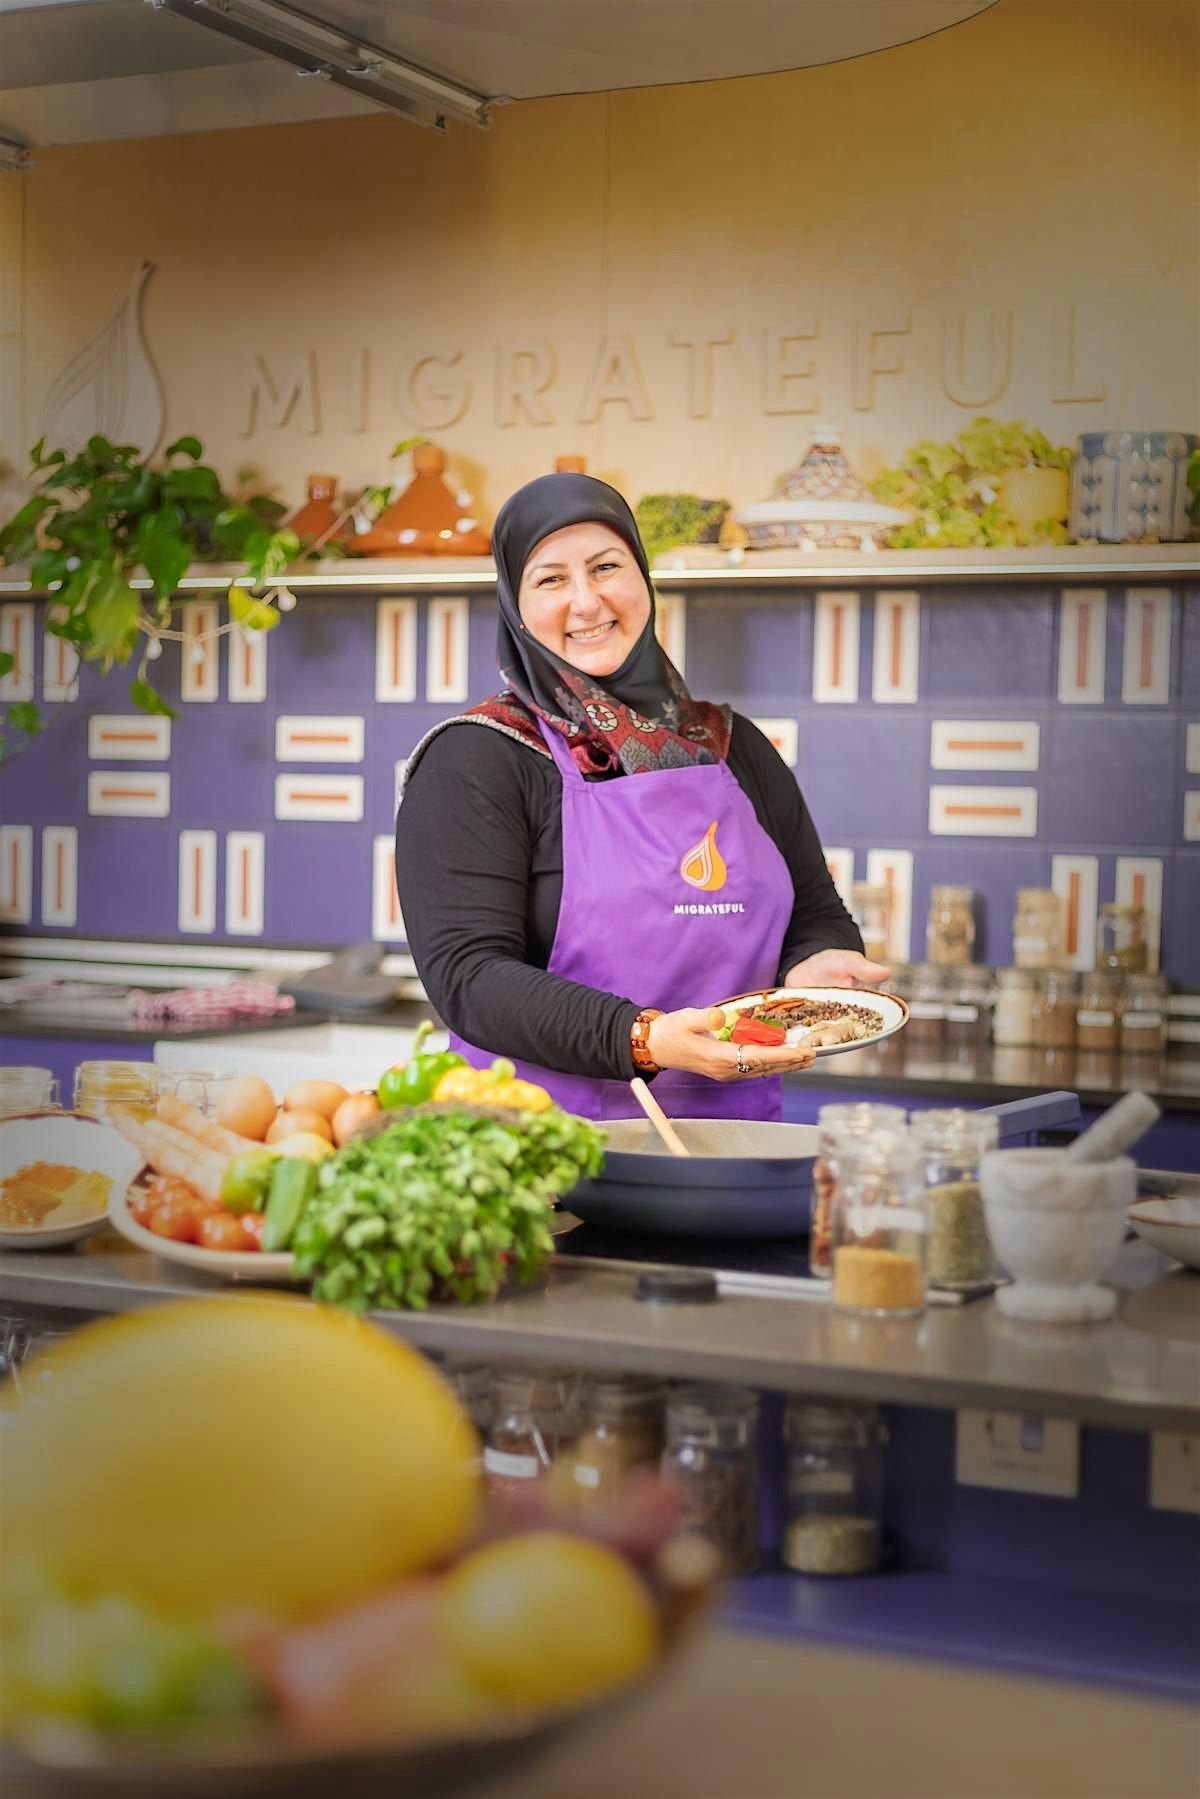 Syrian Cookery Class with Randa |Vegan Friendly | LONDON | Cookery School